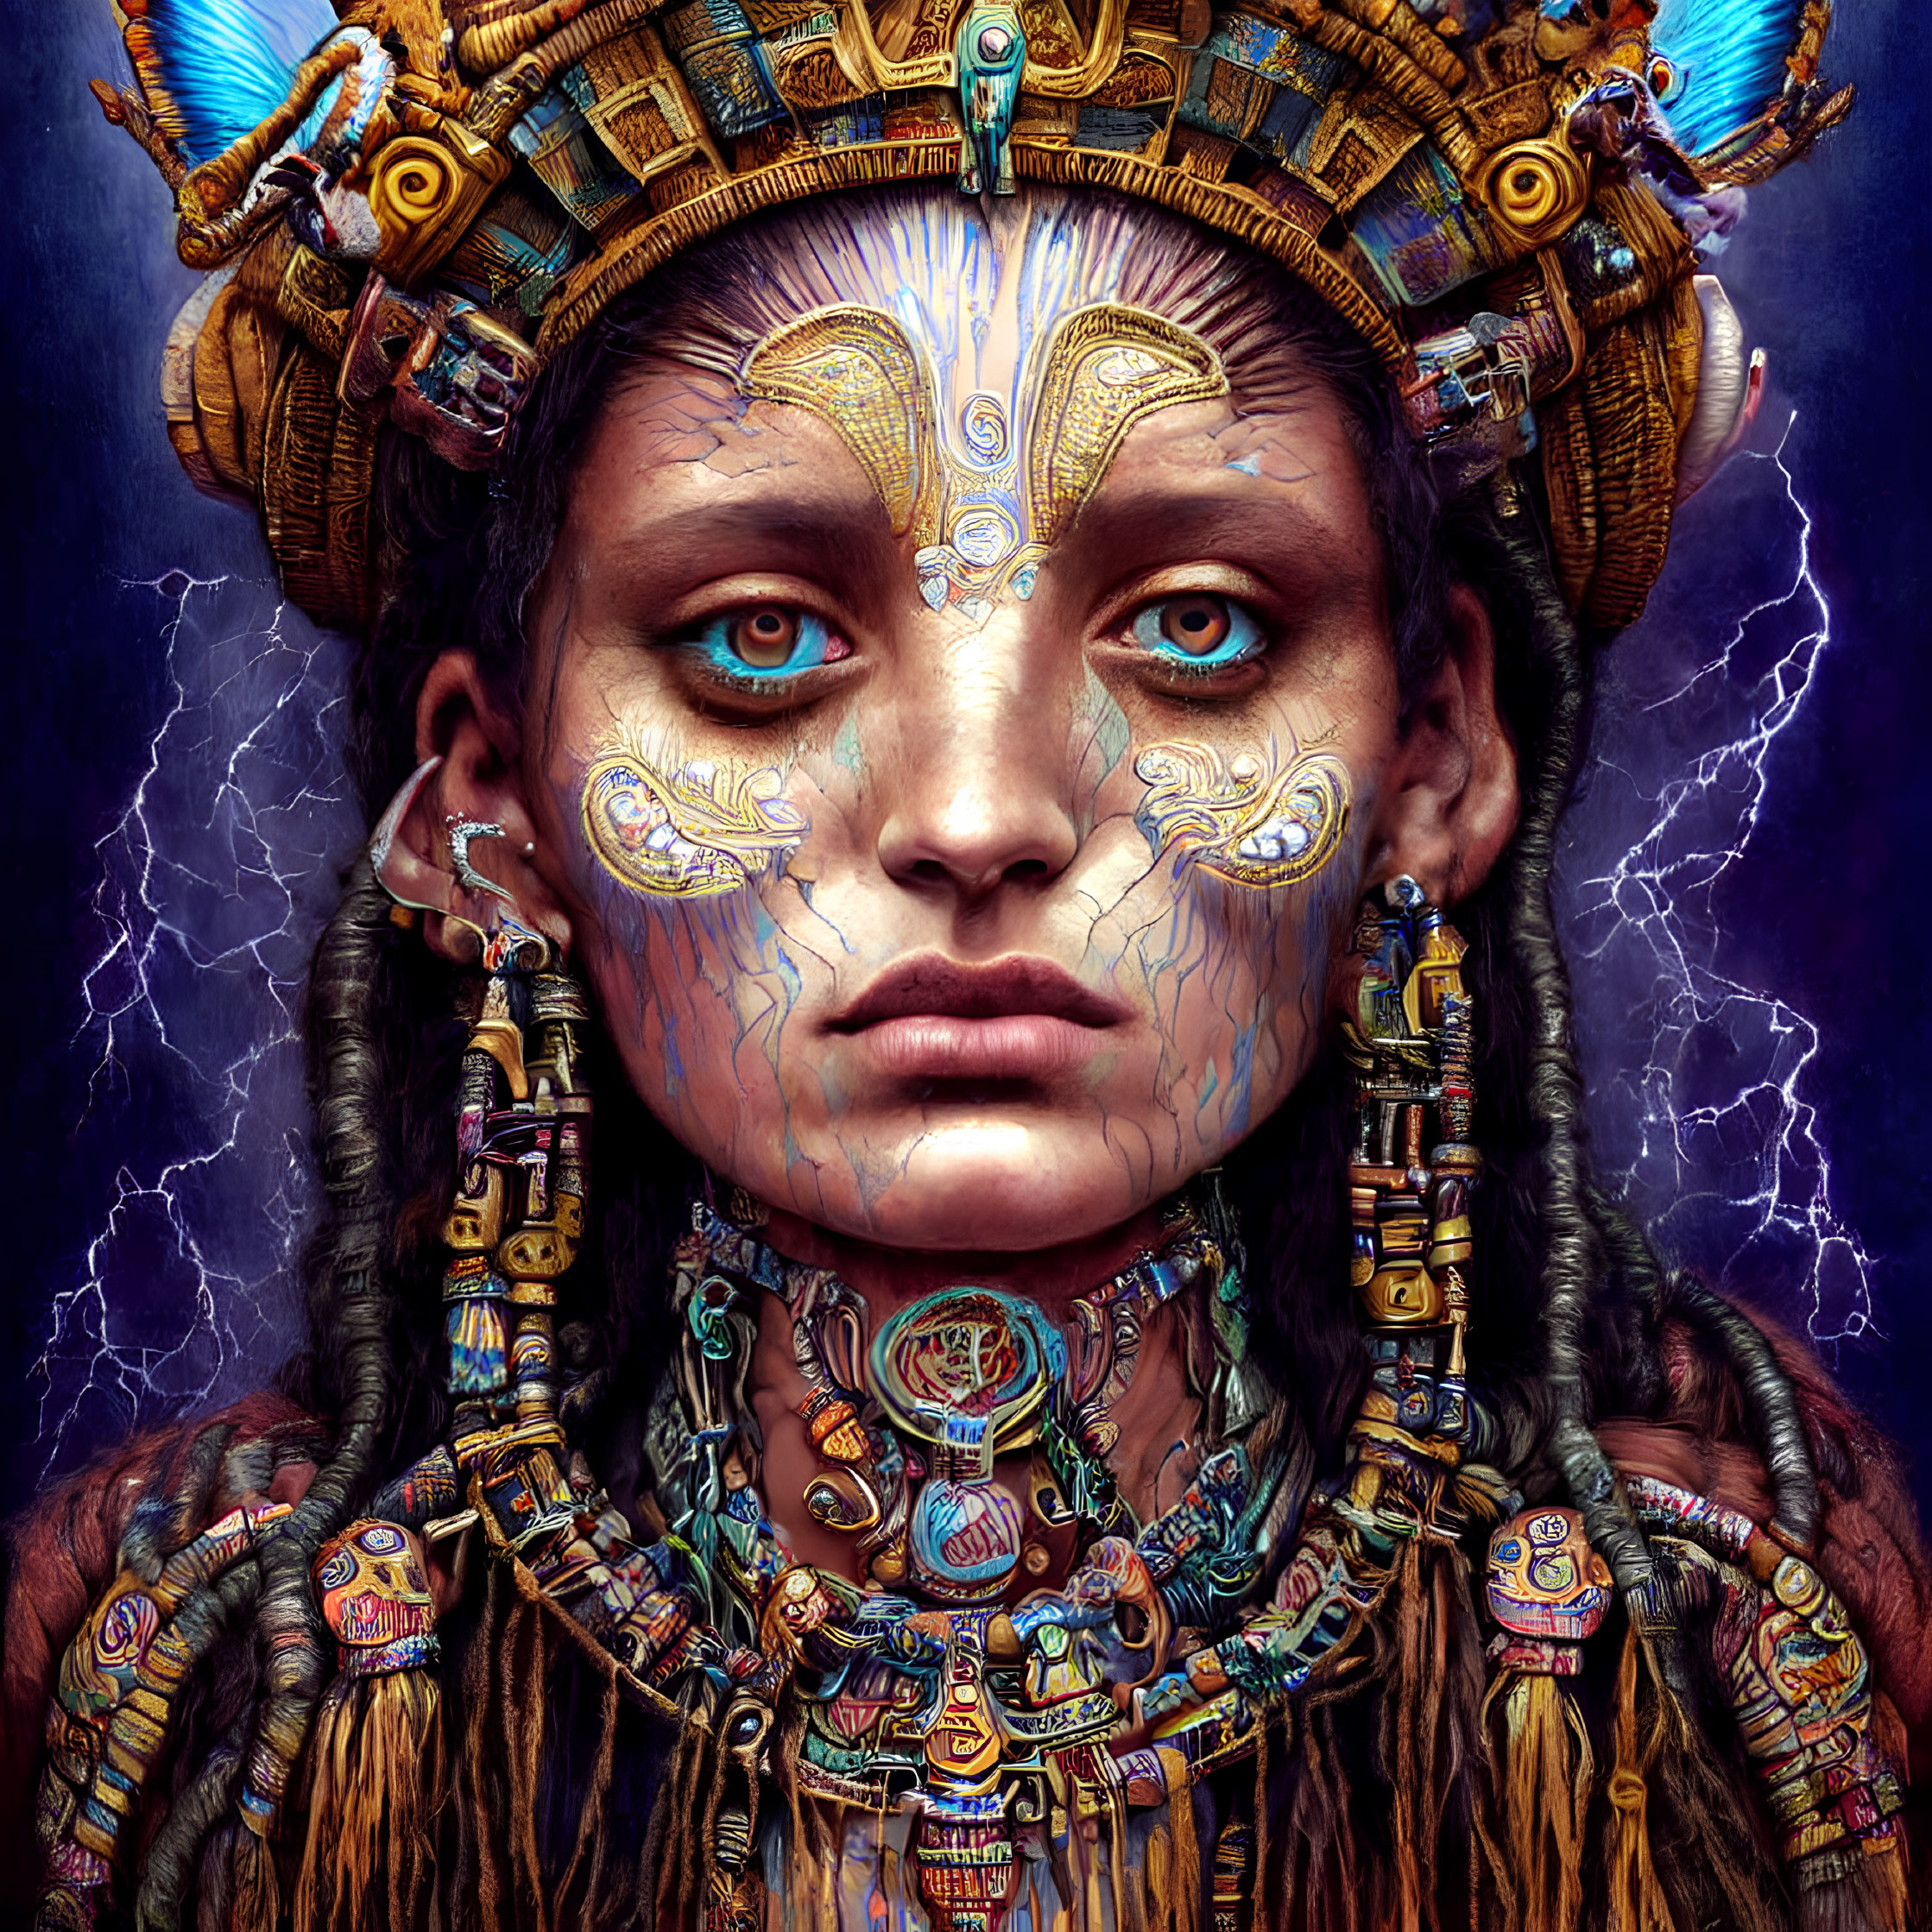 Intricate face paint and detailed headdress in stormy setting